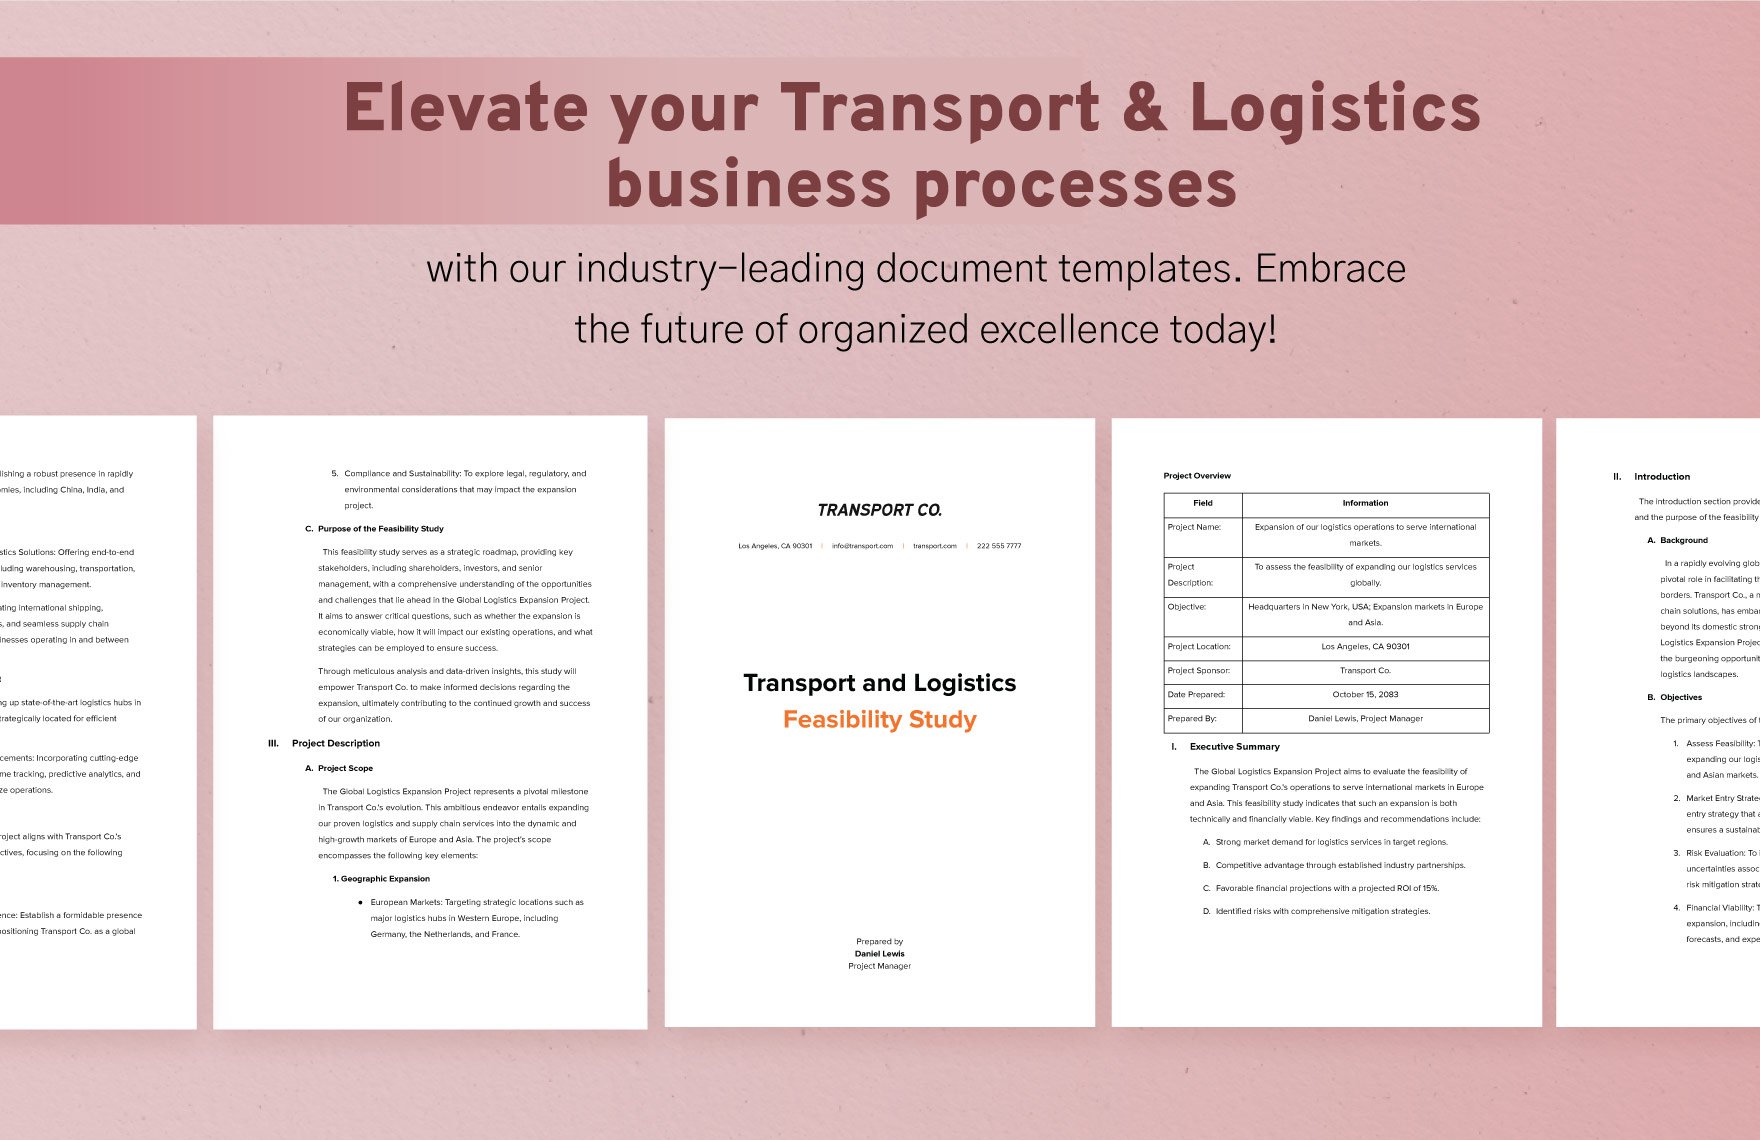 Transport and Logistics Feasibility Study Template